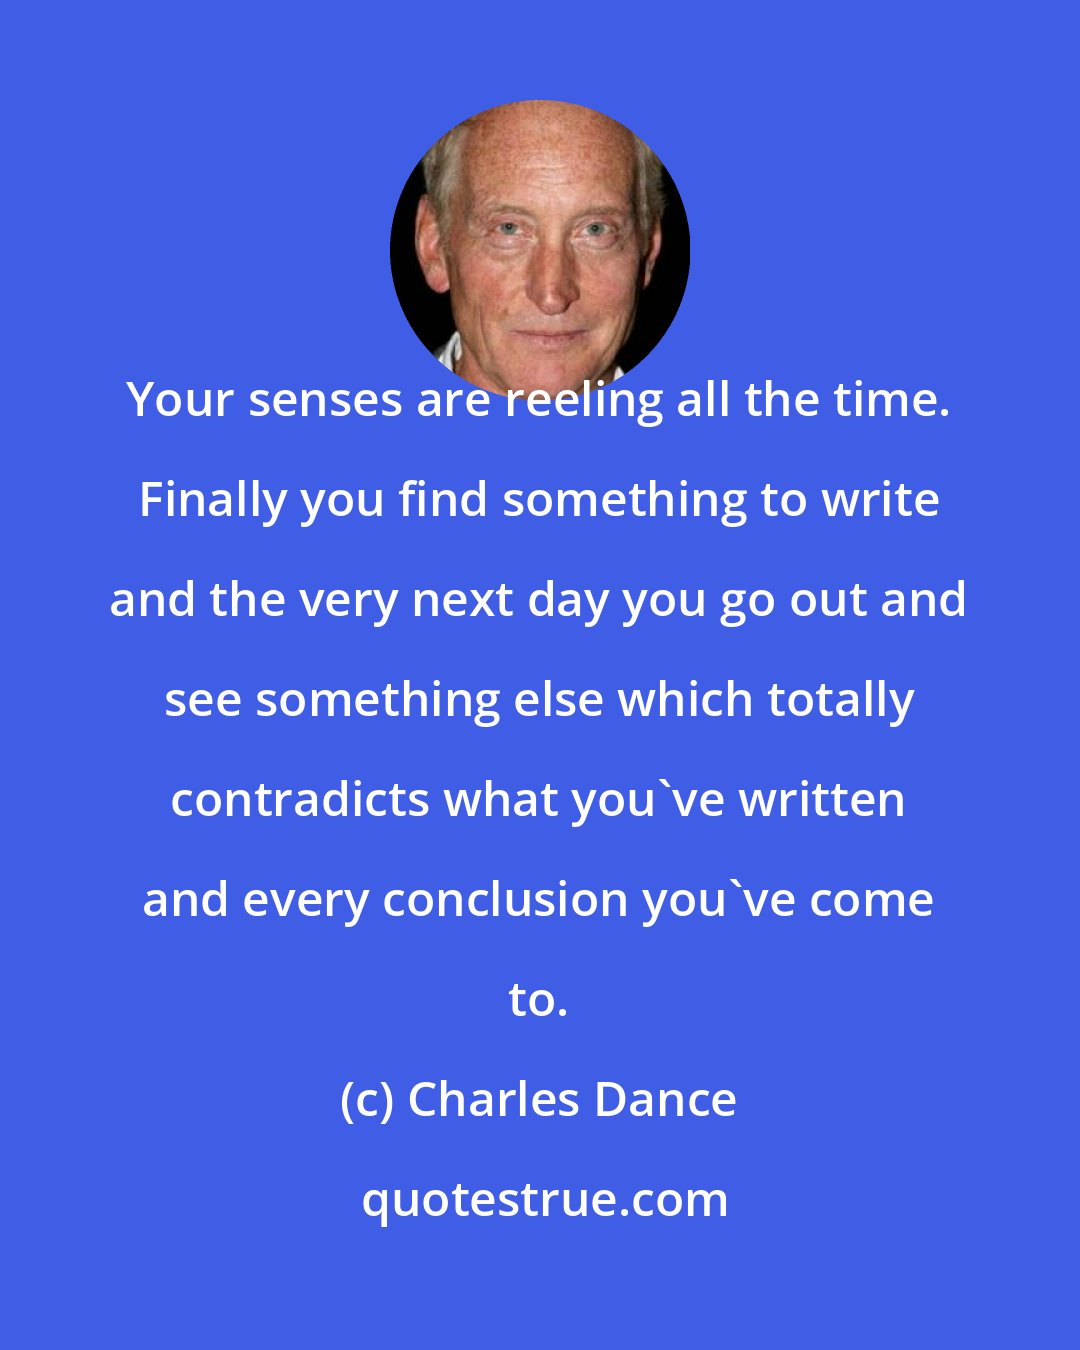 Charles Dance: Your senses are reeling all the time. Finally you find something to write and the very next day you go out and see something else which totally contradicts what you've written and every conclusion you've come to.